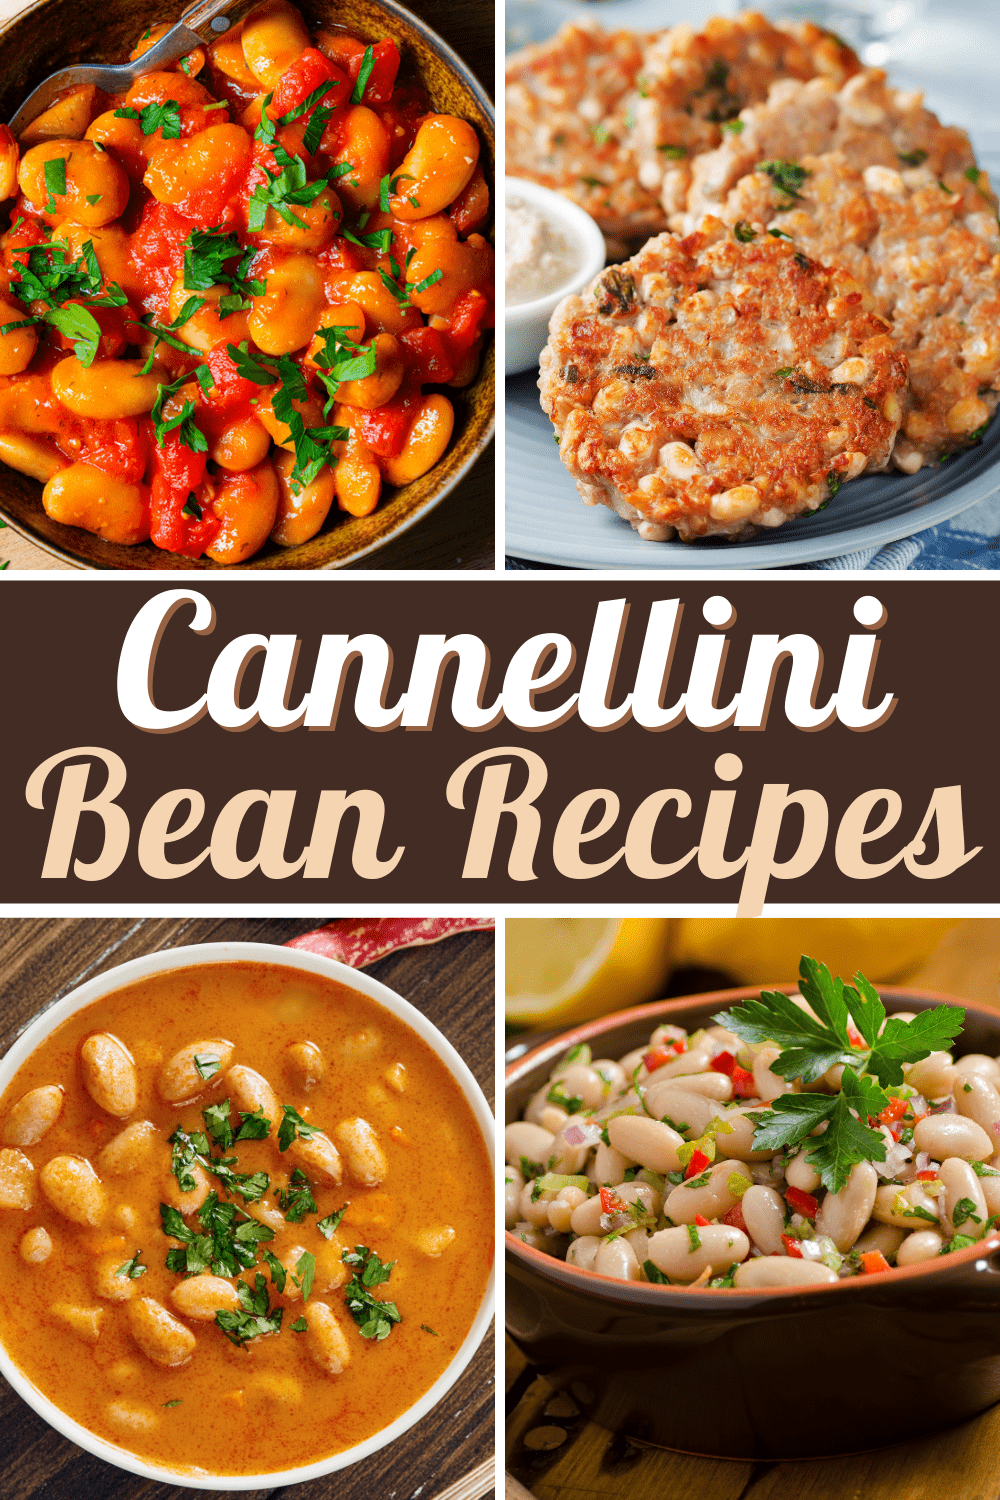 17 Cannellini Bean Recipes - Insanely Good